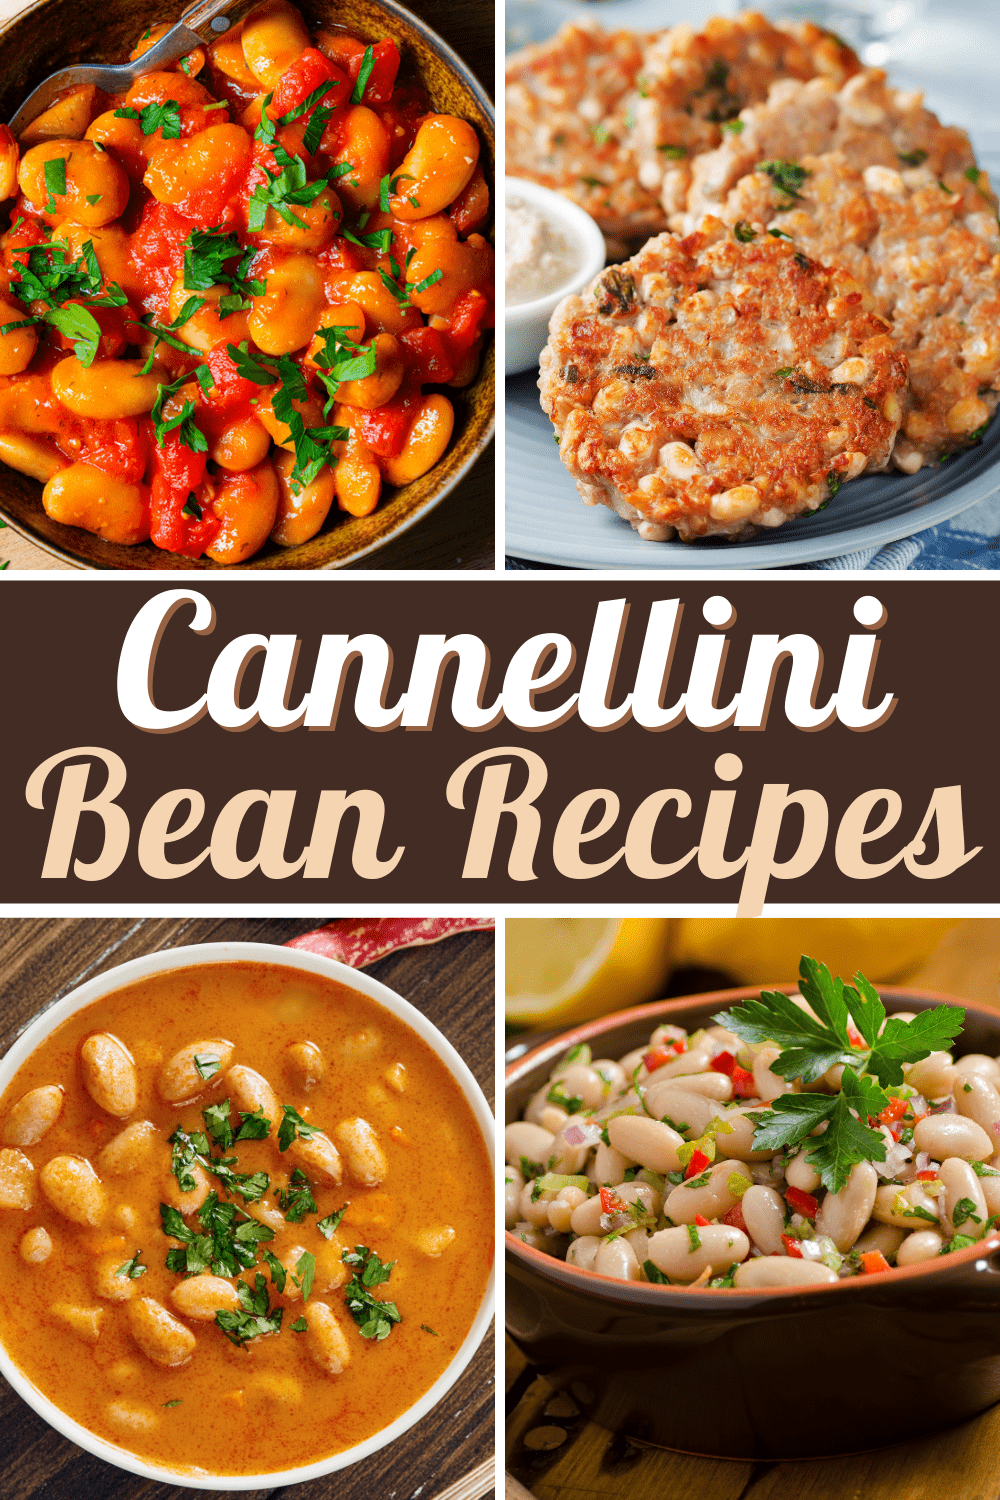 17 Cannellini Bean Recipes - Insanely Good